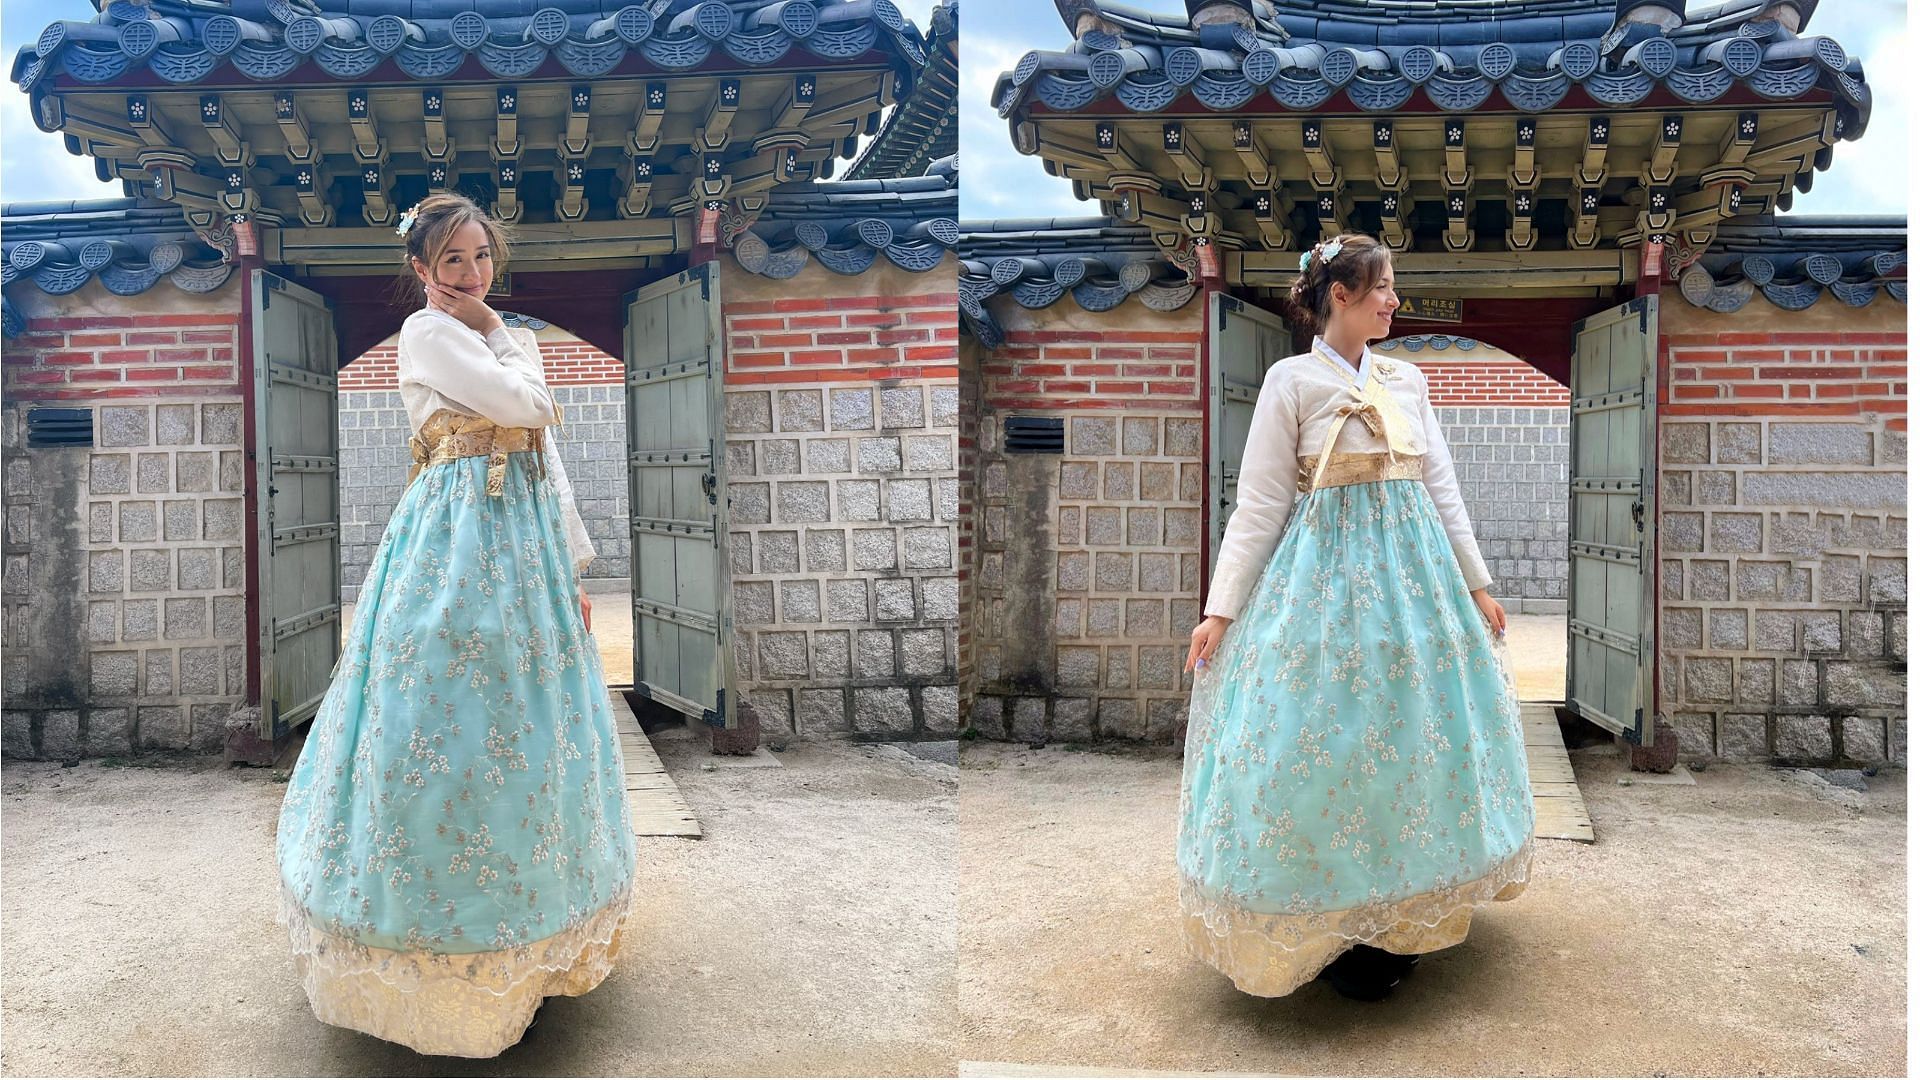 Pokimane shows off her stunning traditional outfit for her last day in Korea (Image via- Pokimane/Twitter)